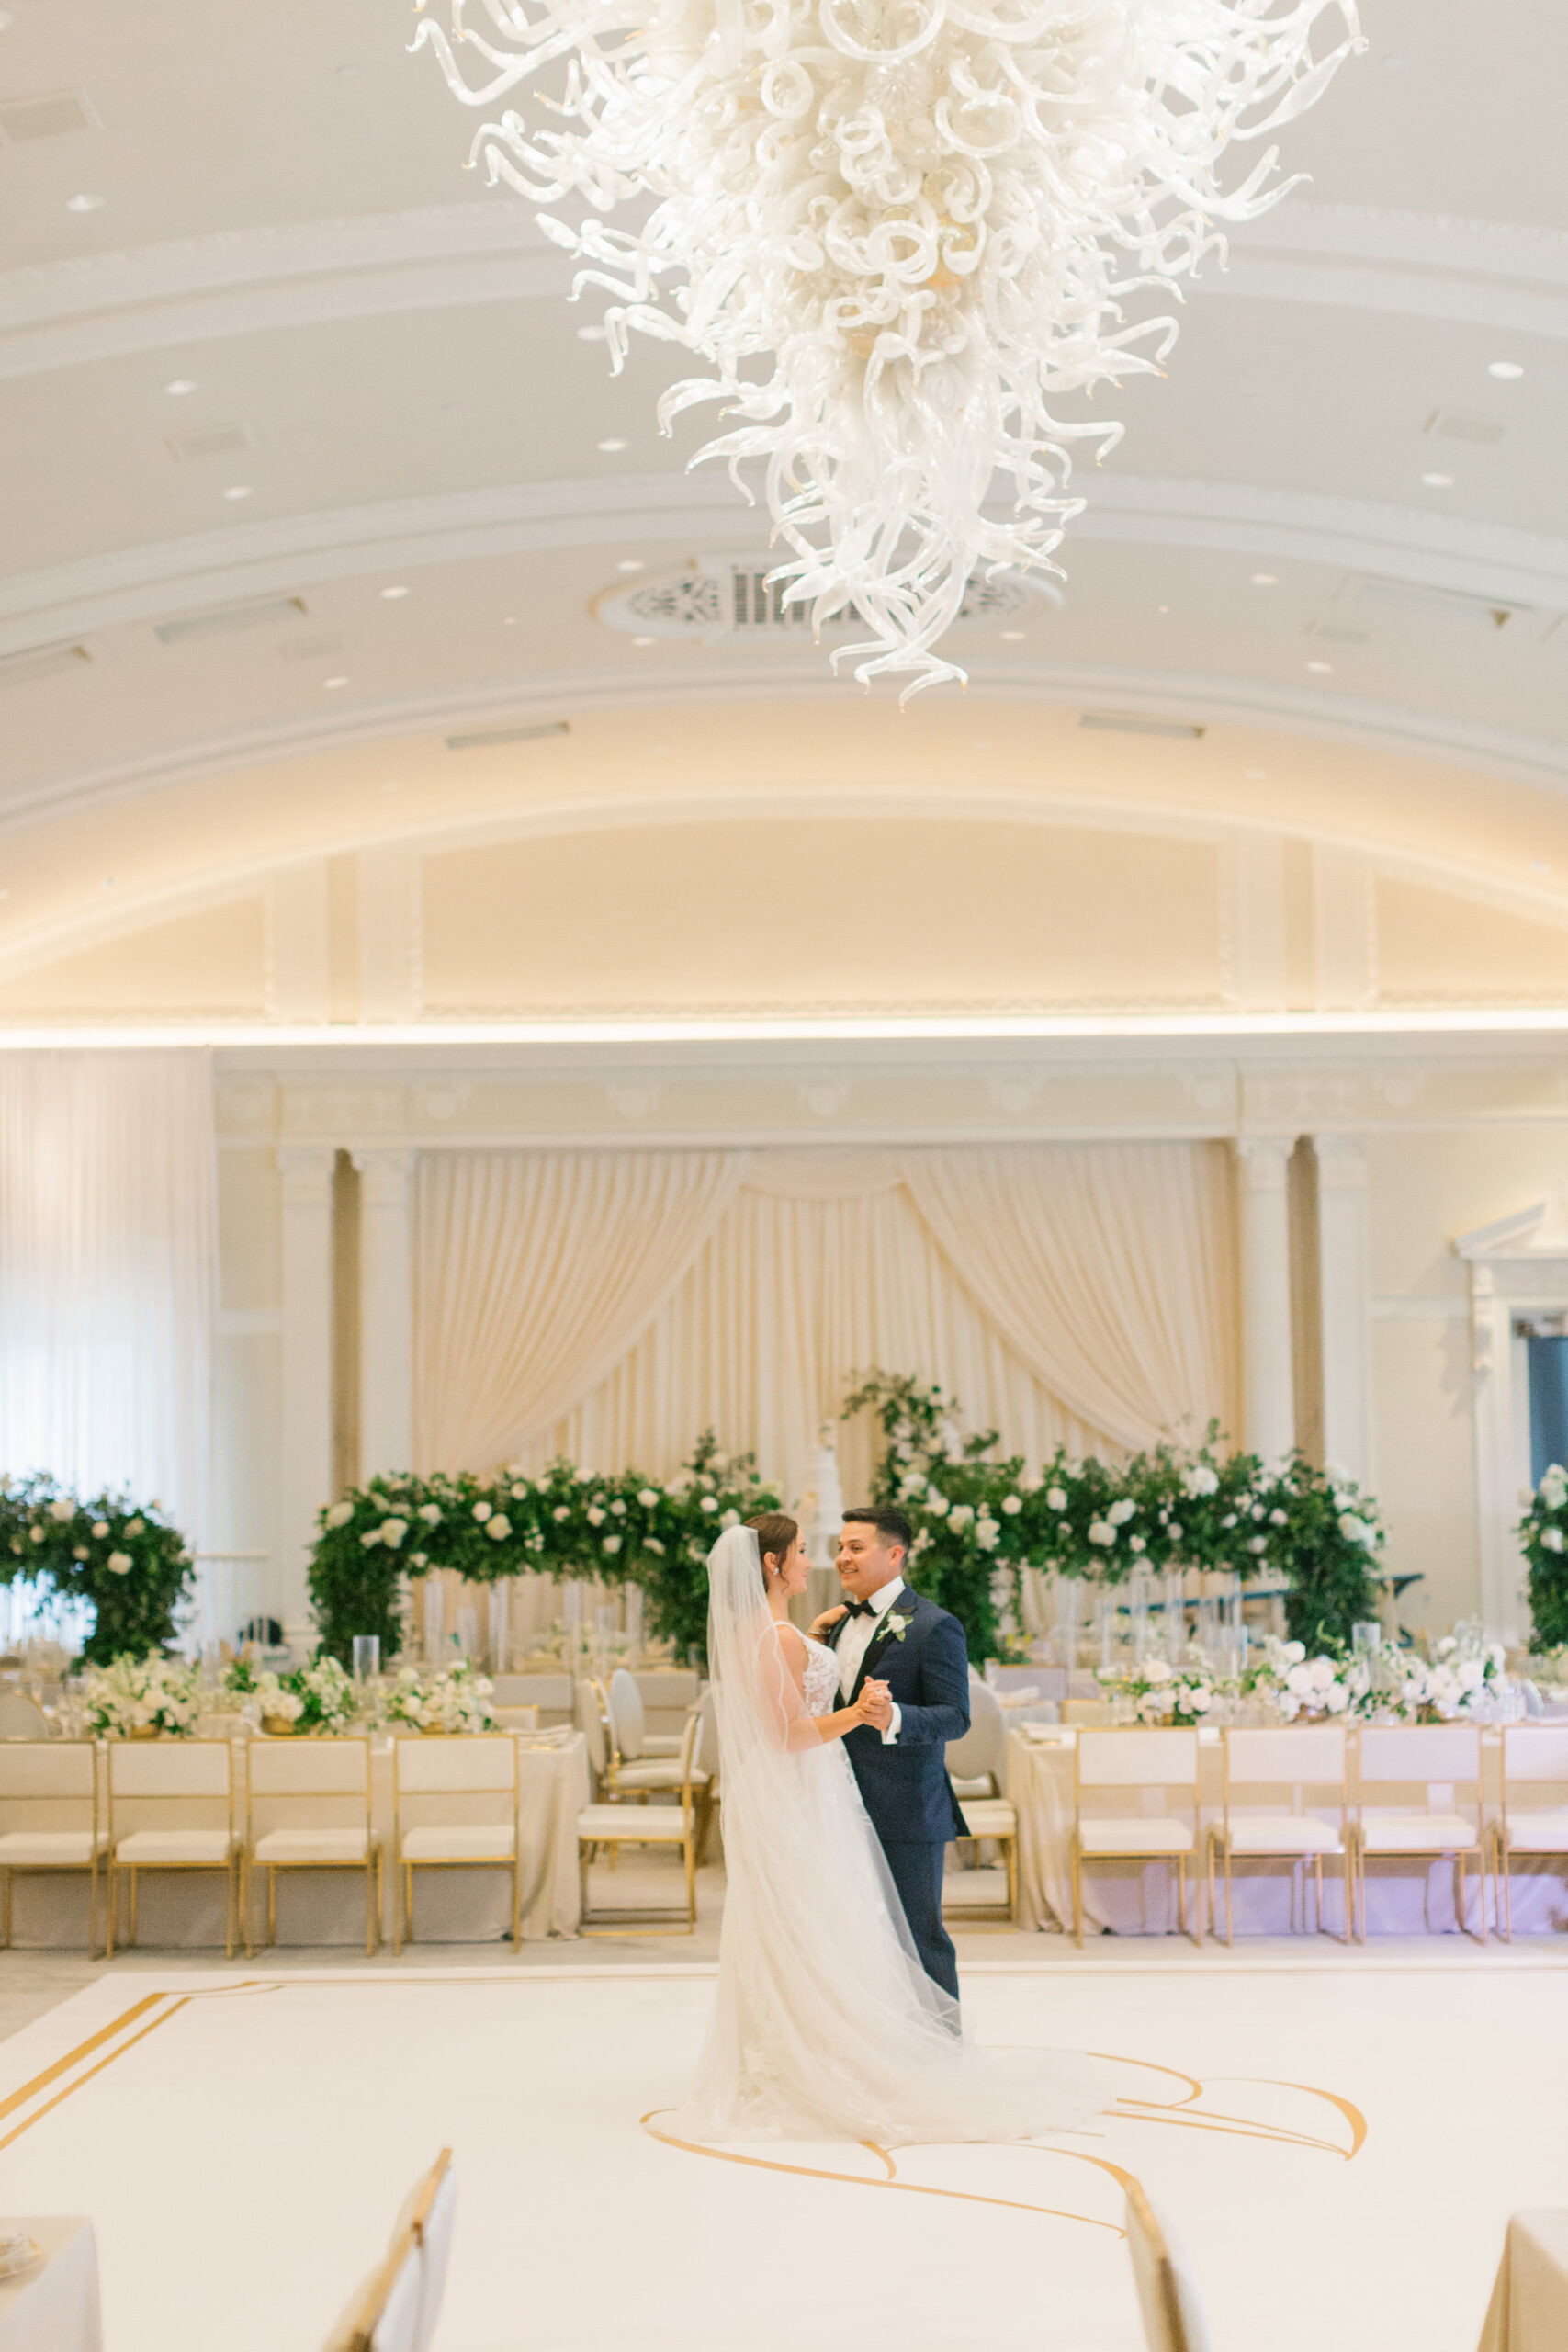 Bride and Groom First Dance Ballroom Wedding Portrait | Planner Parties a la Carte | The Vinoy Grand Ballroom | Videographer Mars and the Moon Films